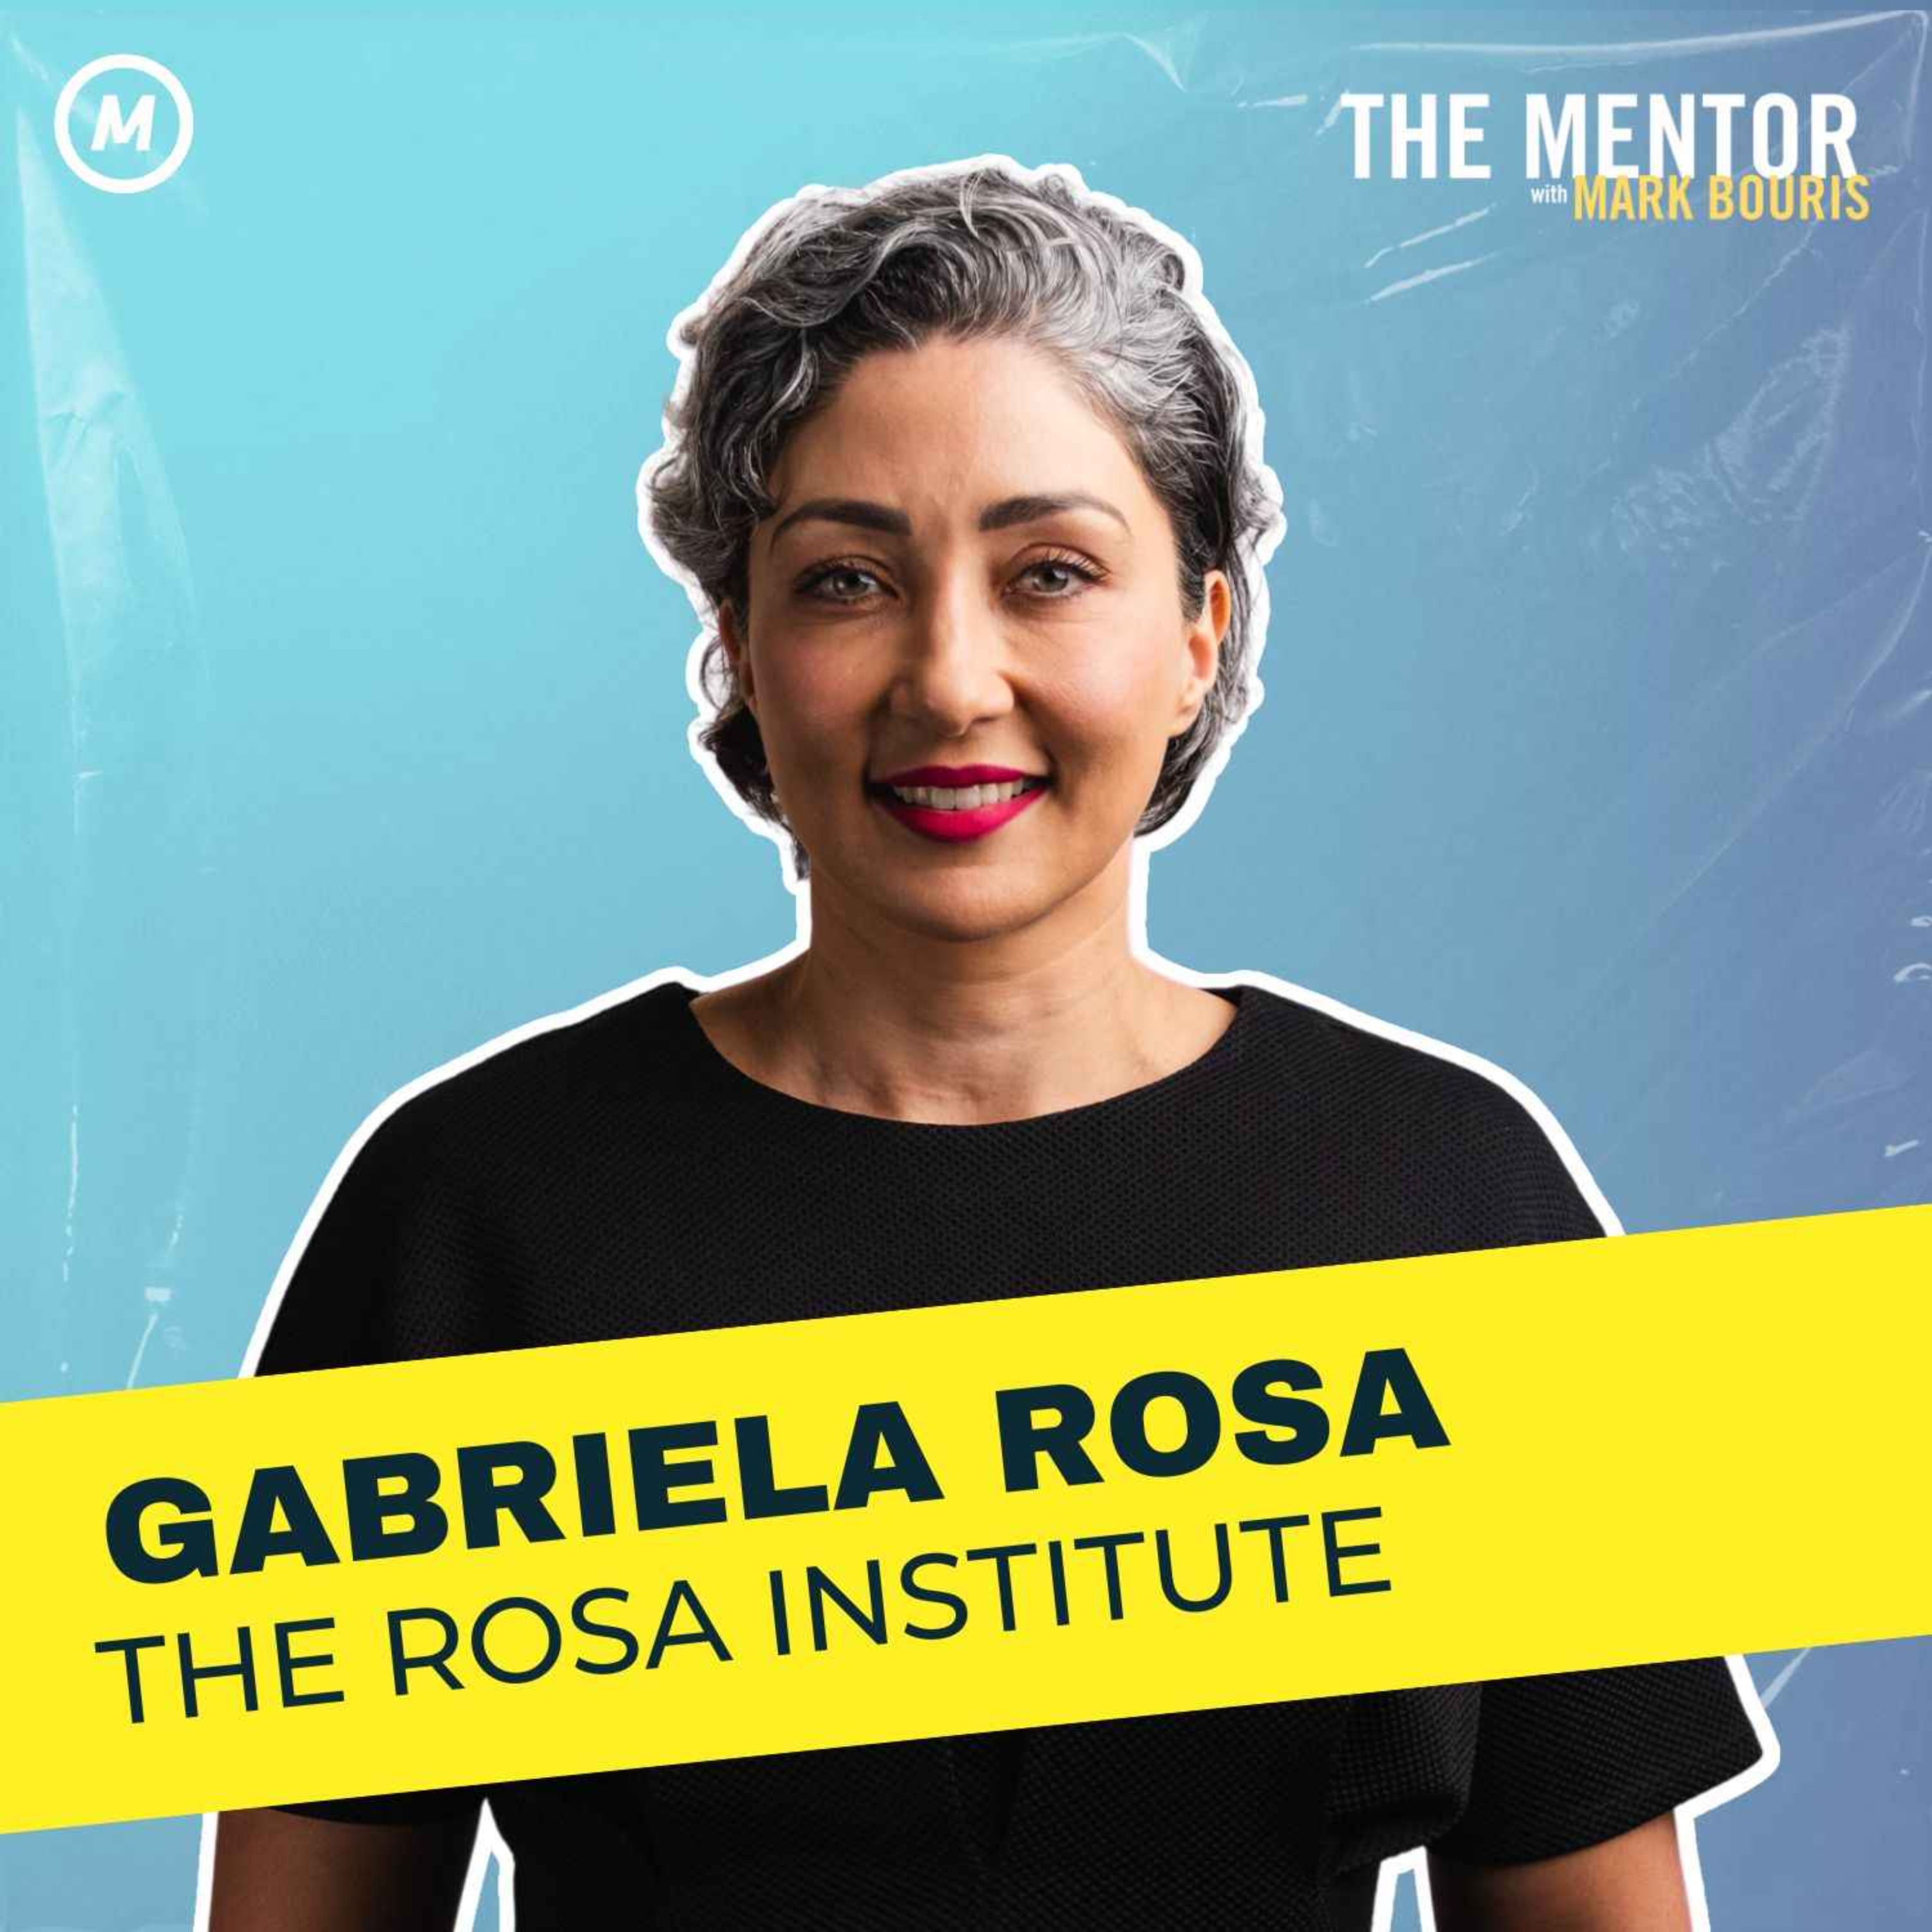 #432 The Fertility Queen: How Gabriela Rosa’s work has helped 100s of thousands